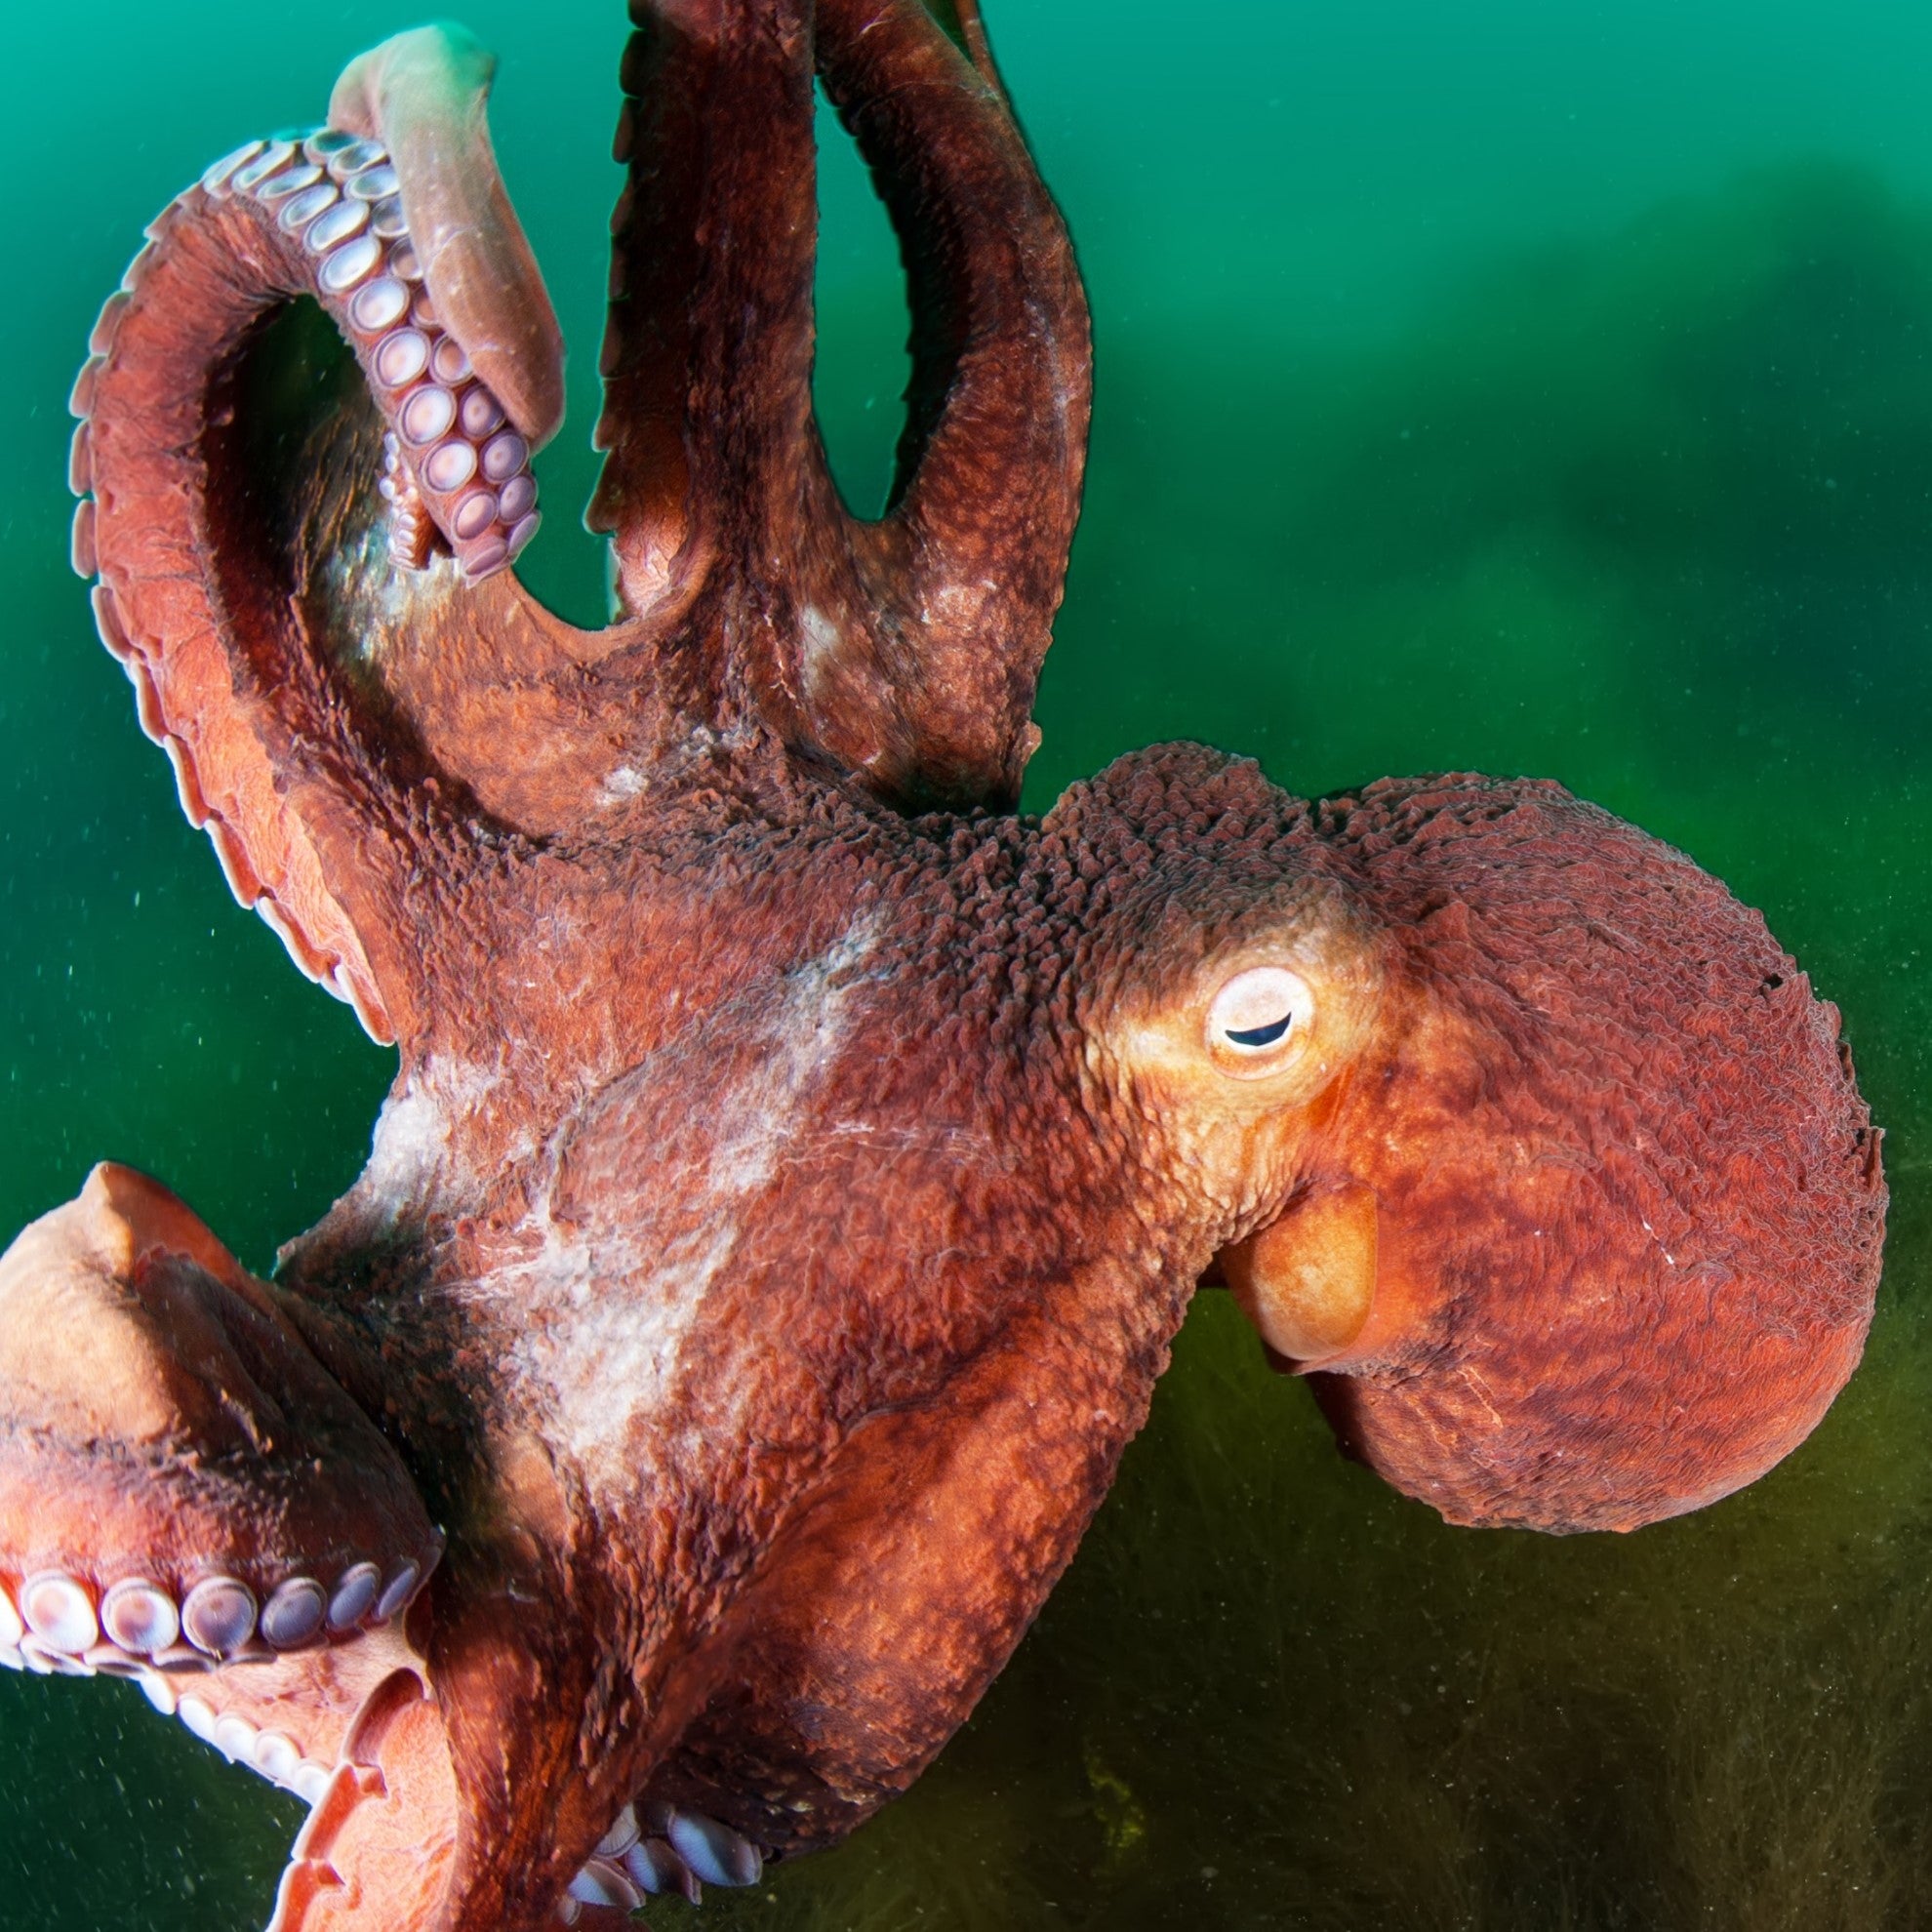 Giant Pacific octopus - WWF-Canada